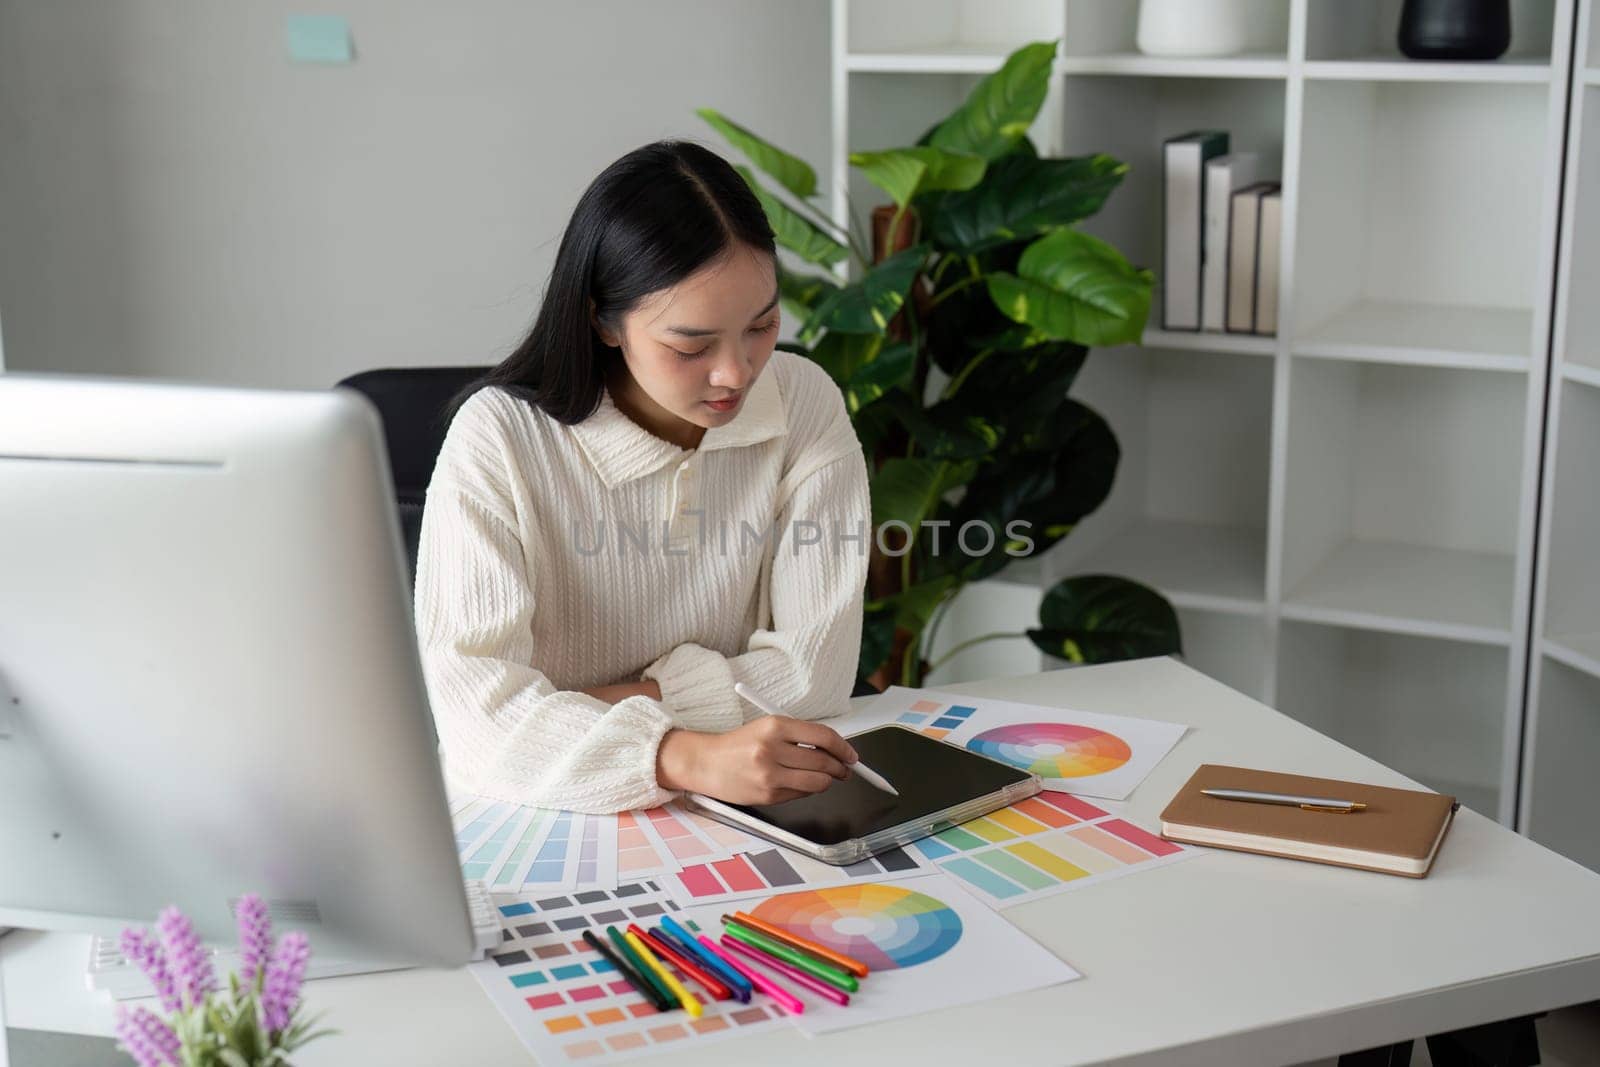 Asian woman graphic designer working in home office. Artist creative designer illustrator graphic skill concept by nateemee